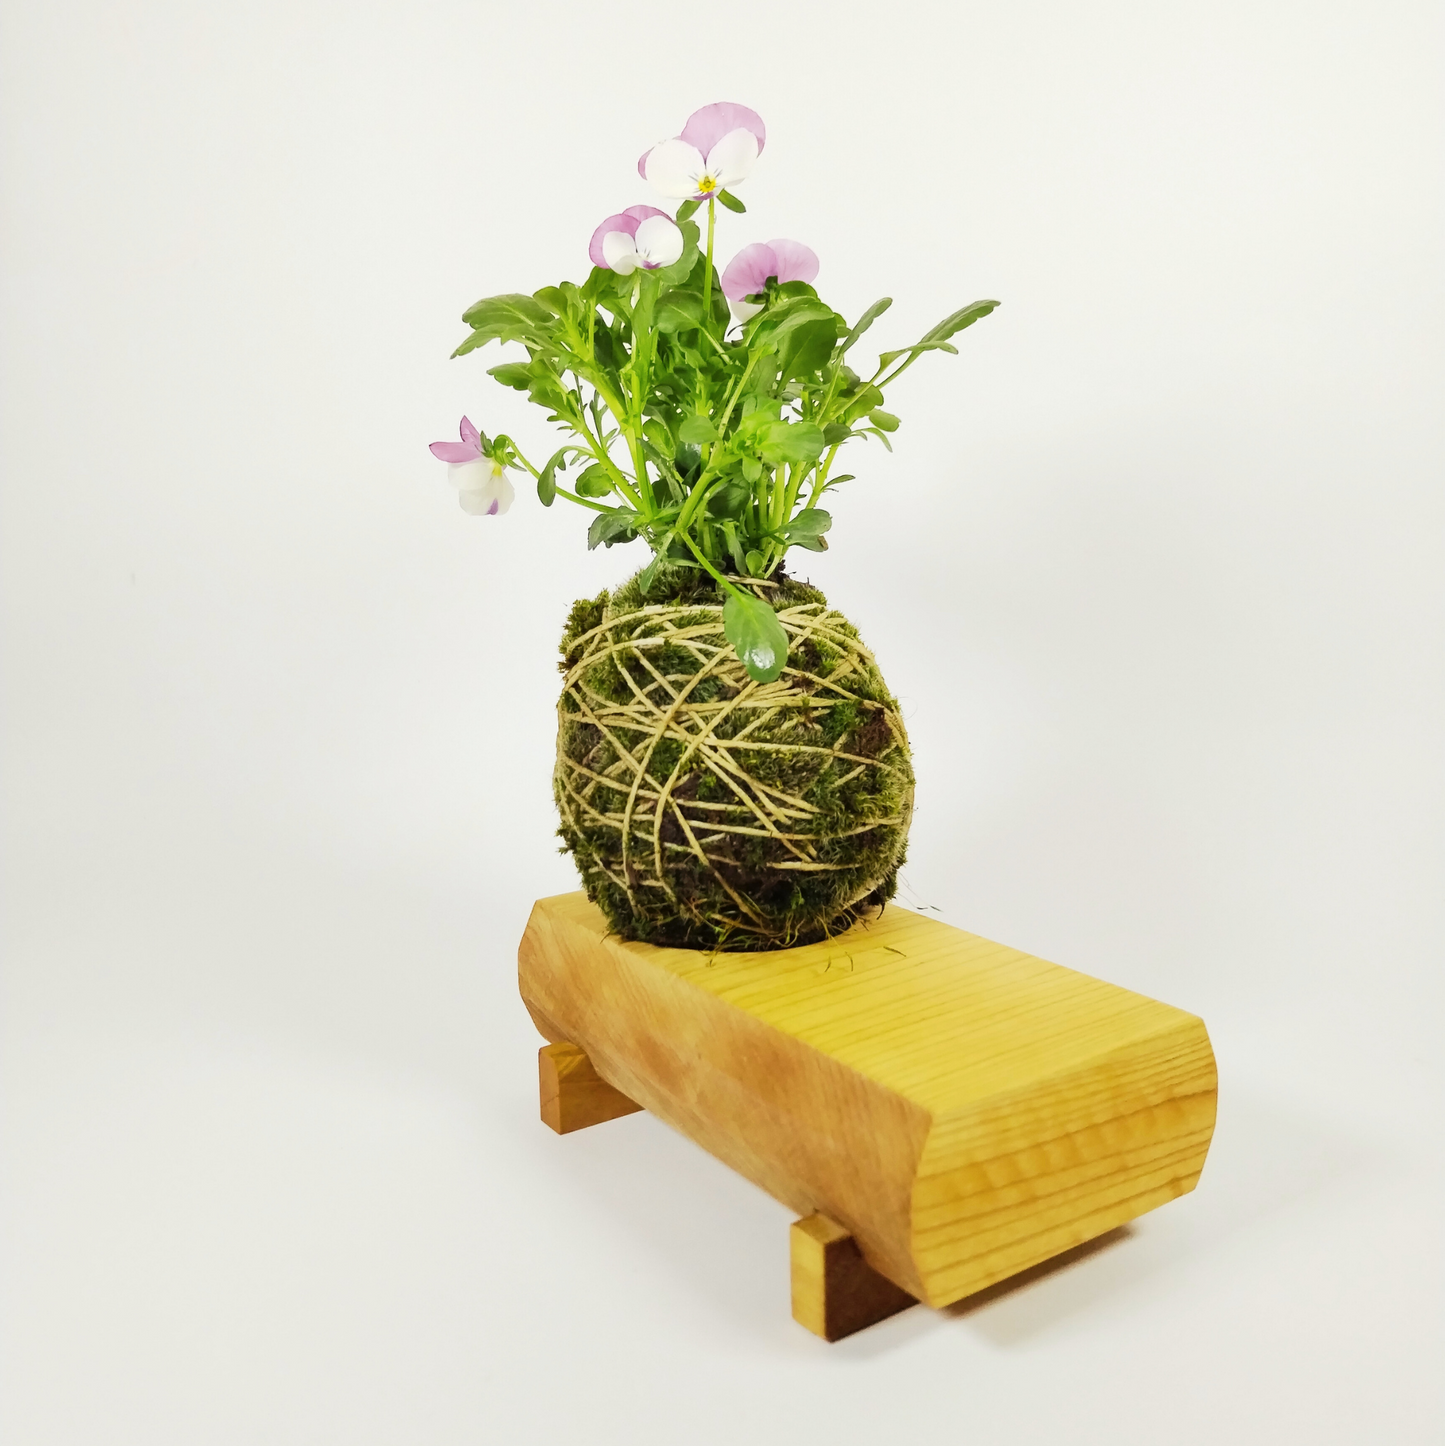 Botanical Prisms in Linden Wood - Kusamono Toy Pot: a toy that grows with your imagination!